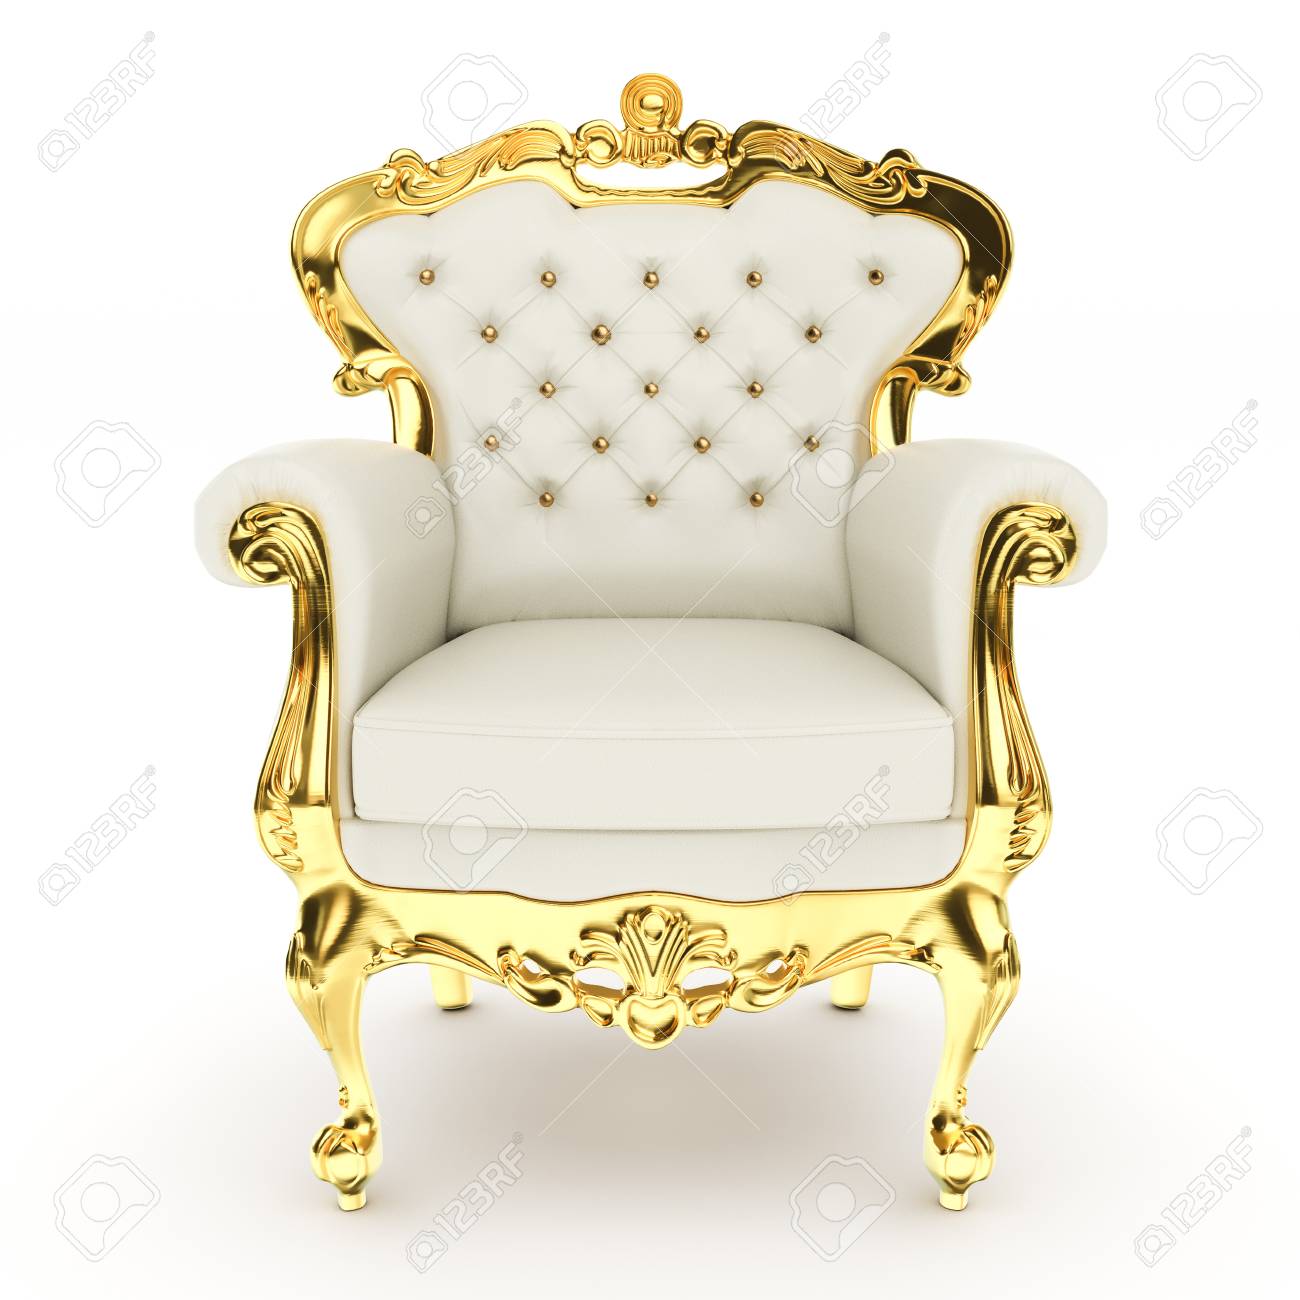 3d Kings Throne Royal Chair On White Background 3d Illustration 1300x1300